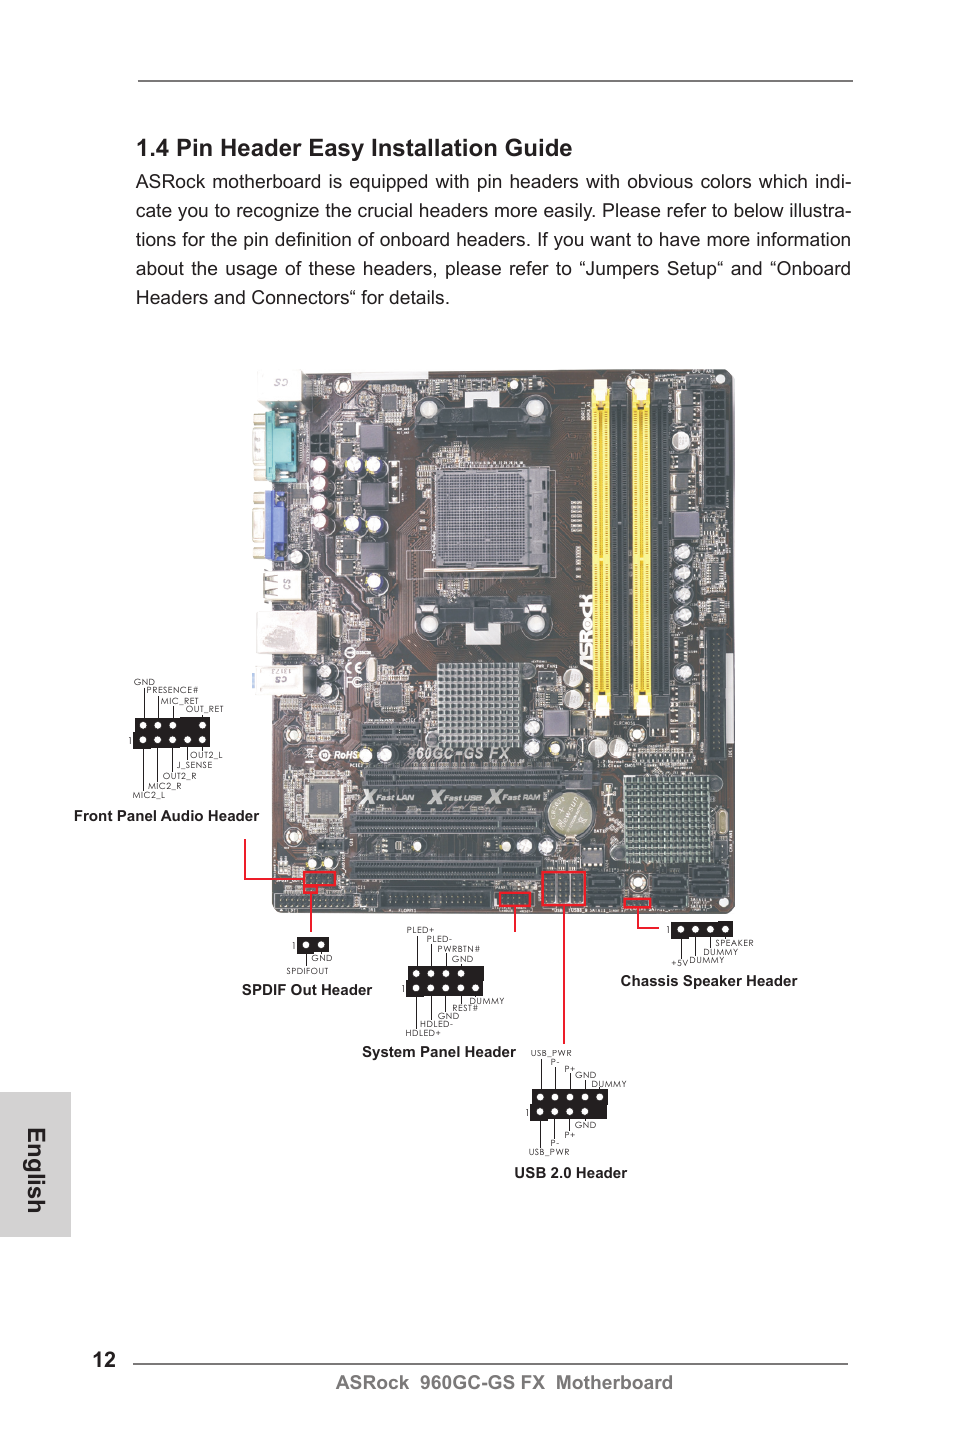 English 1.4 pin header easy installation guide, Asrock 960gc-gs fx  motherboard, Front panel audio header spdif out header | ASRock 960GC-GS FX  User Manual | Page 12 / 55